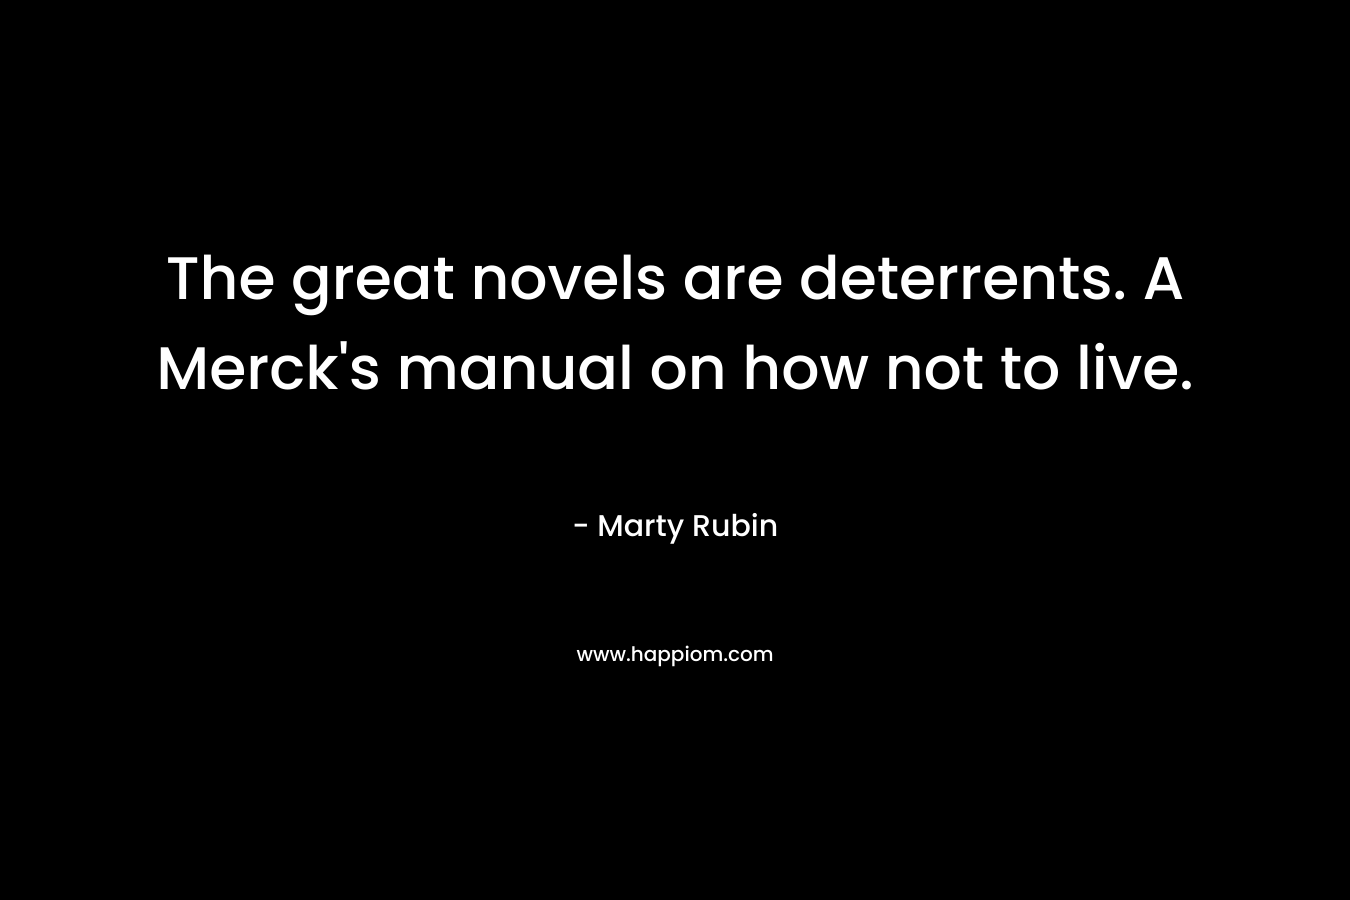 The great novels are deterrents. A Merck's manual on how not to live.